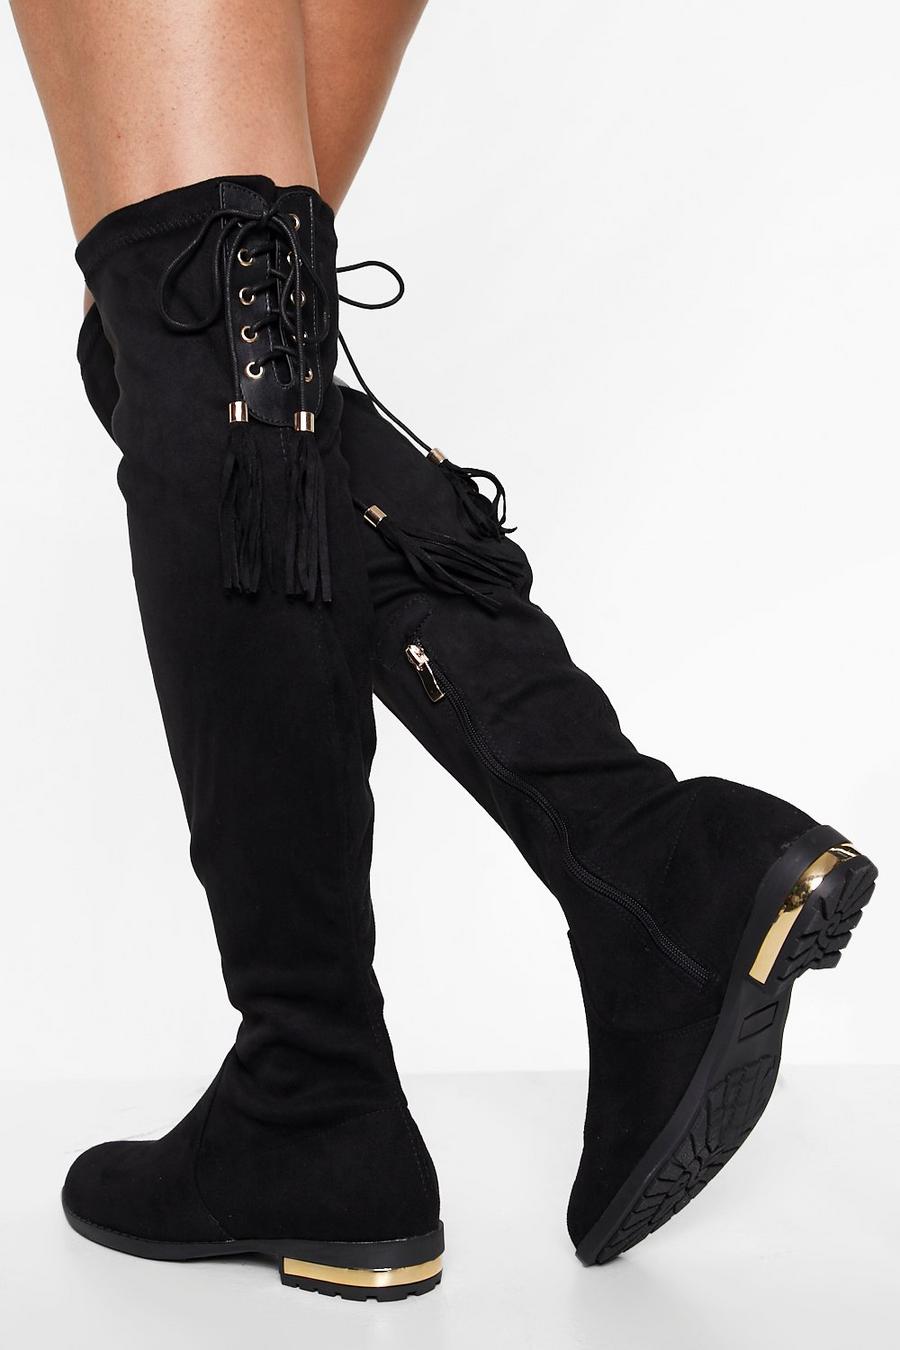 Black Over The Knee Boots Tassel Detail Boots image number 1